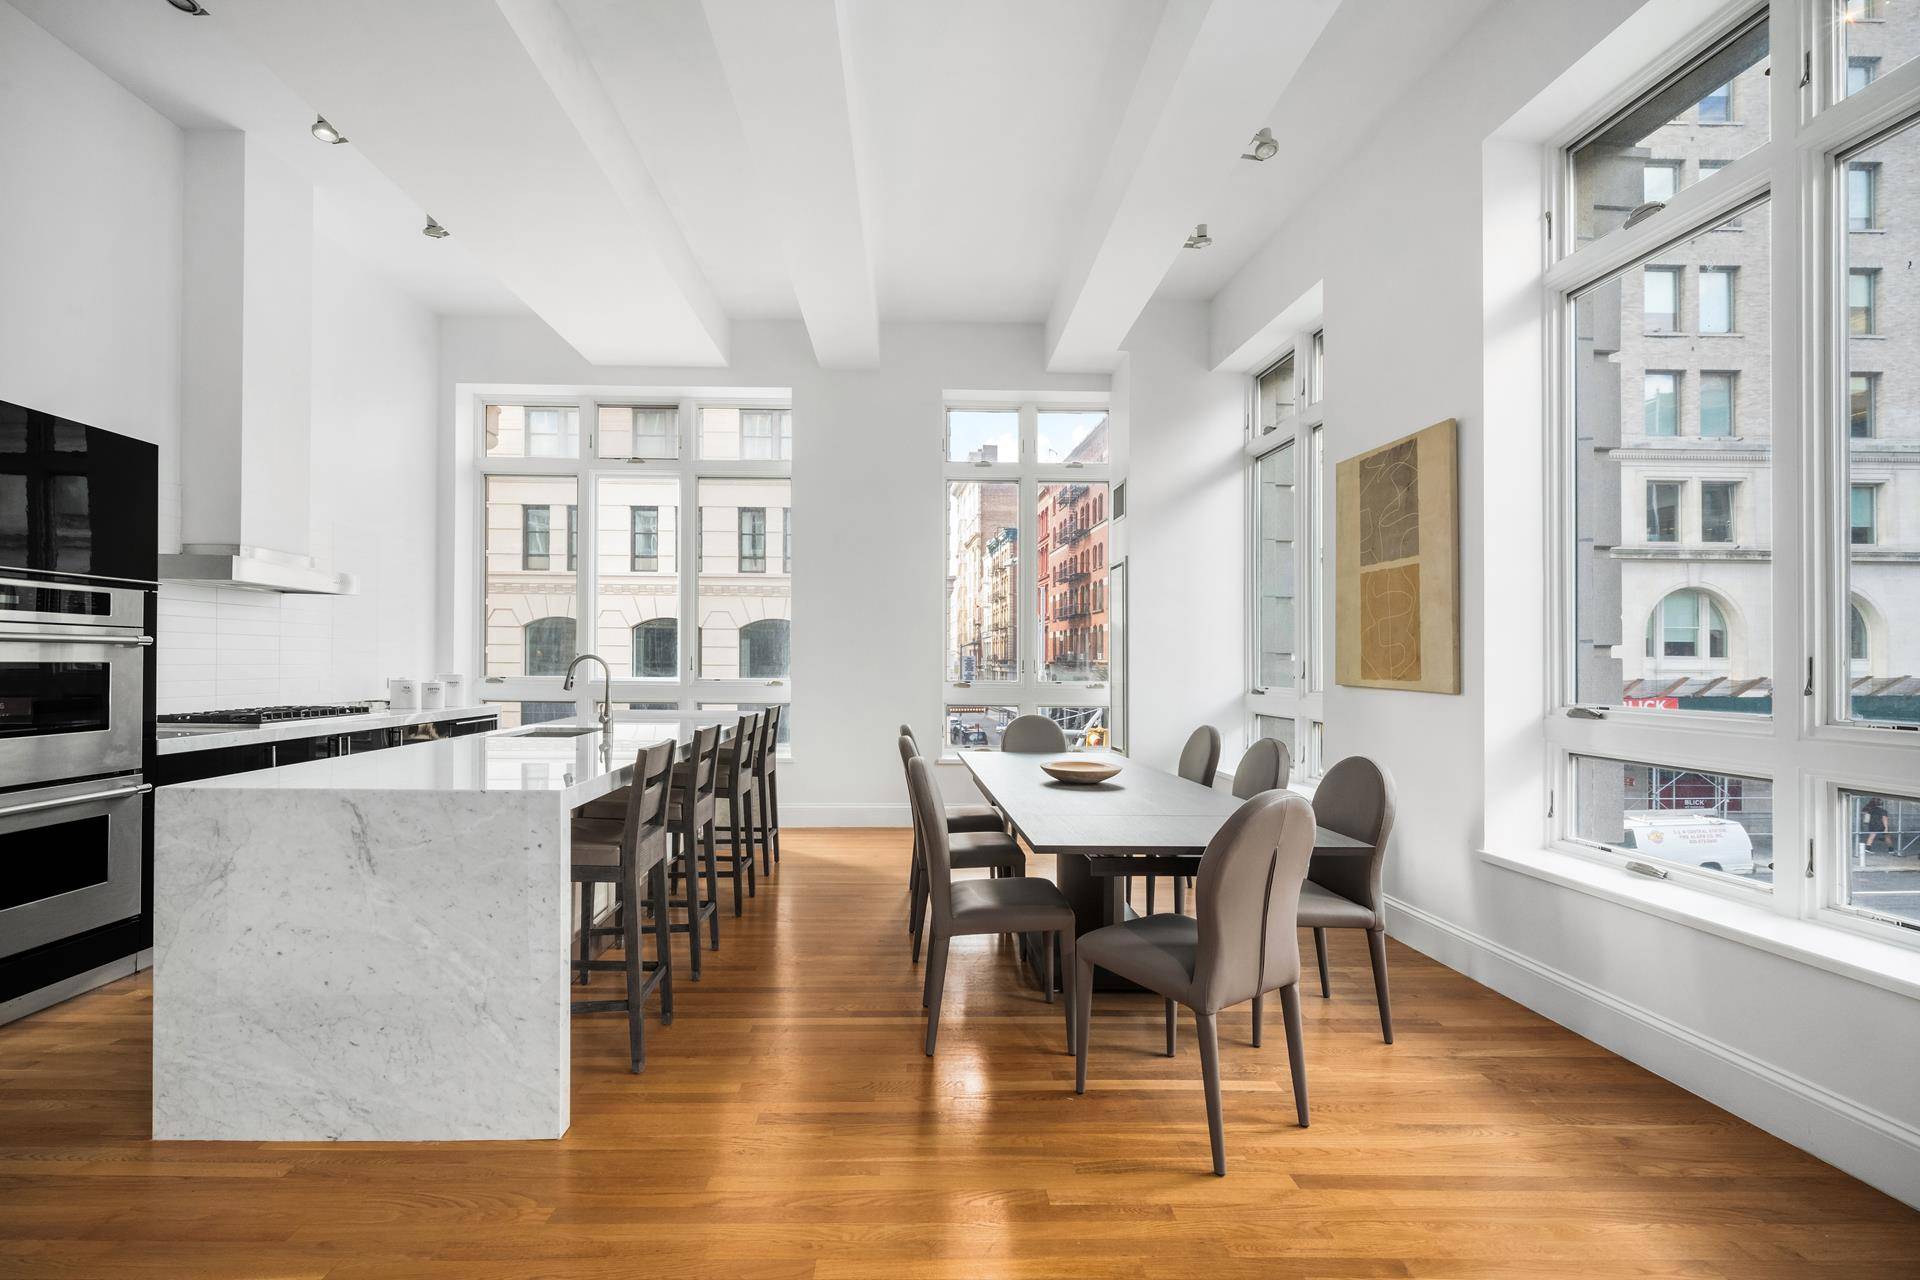 JUST UPDATED. This stunning, modern designer loft, located at the vibrant frontier of SoHo, Nolita, Little Italy and Chinatown, features three bedrooms and three completely updated baths throughout 2300 square ...